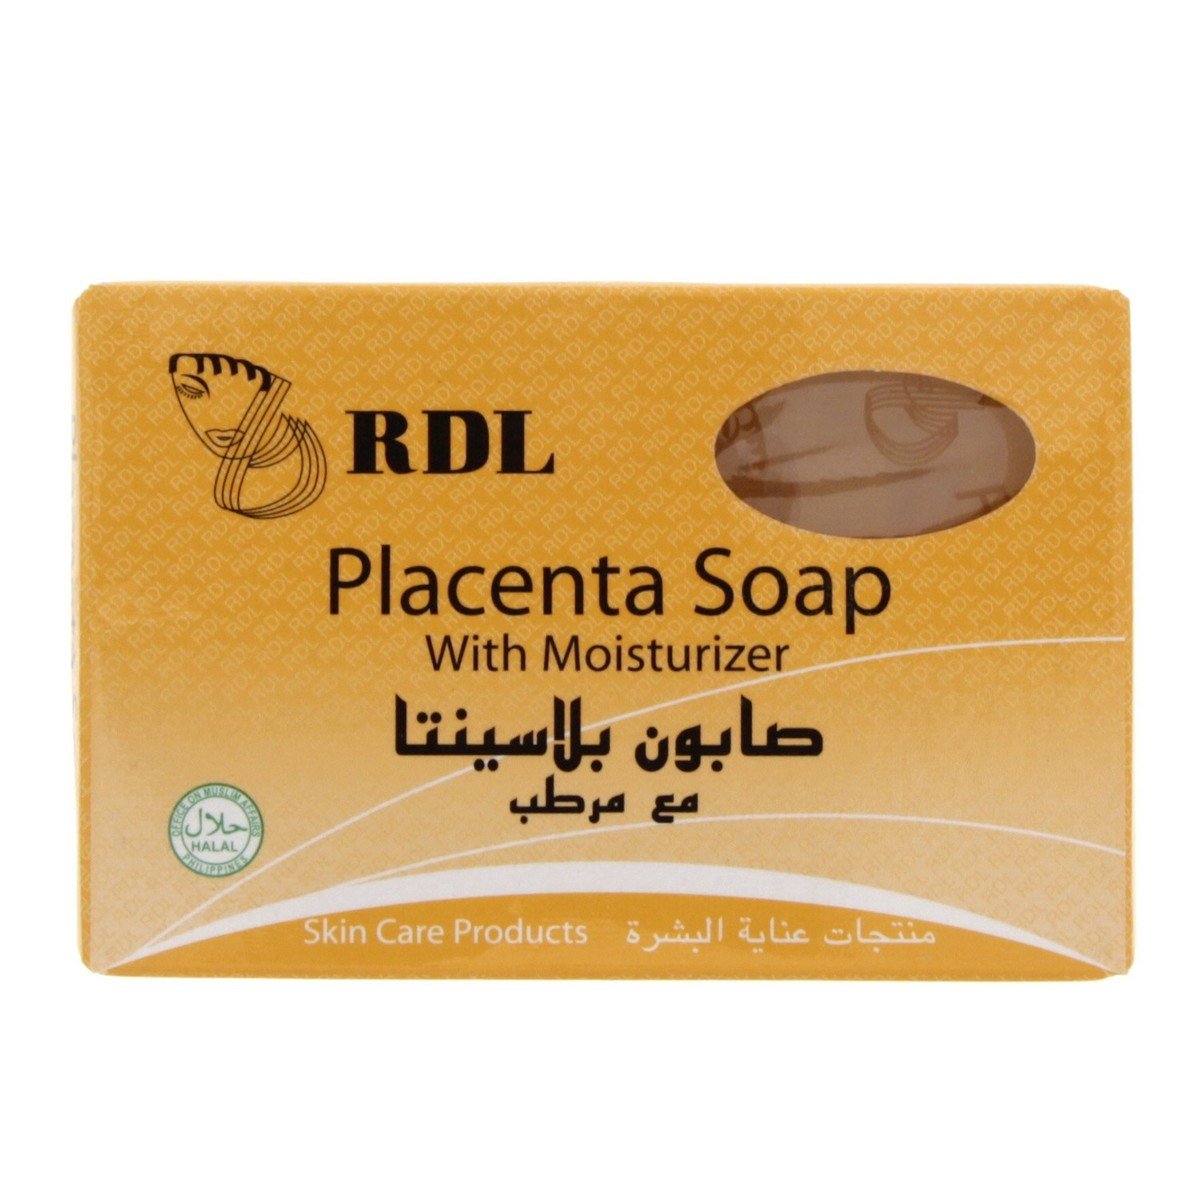 RDL Placenta Soap With Moisturizer 135 g